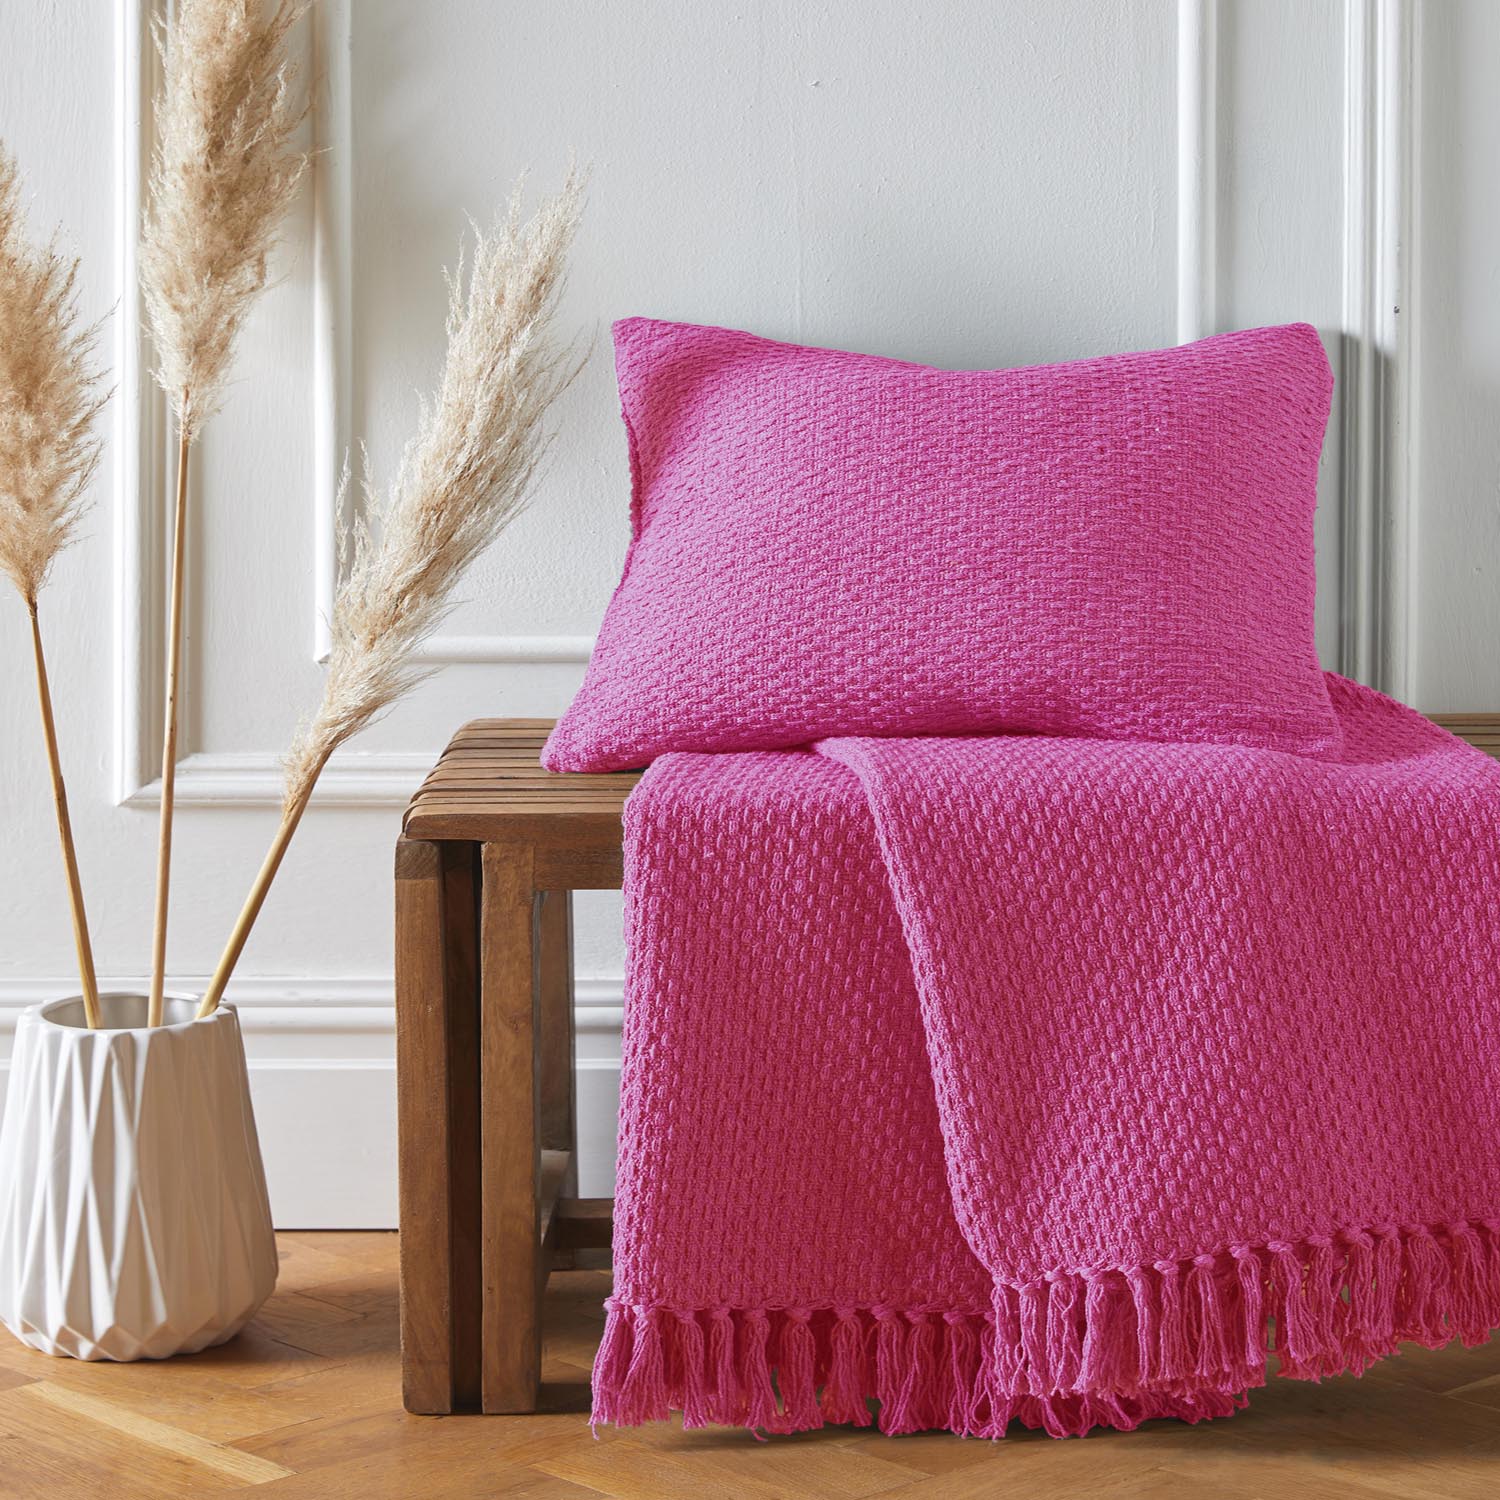 The Home Collection Hanson Pink Throw 130 X 180 1 Shaws Department Stores